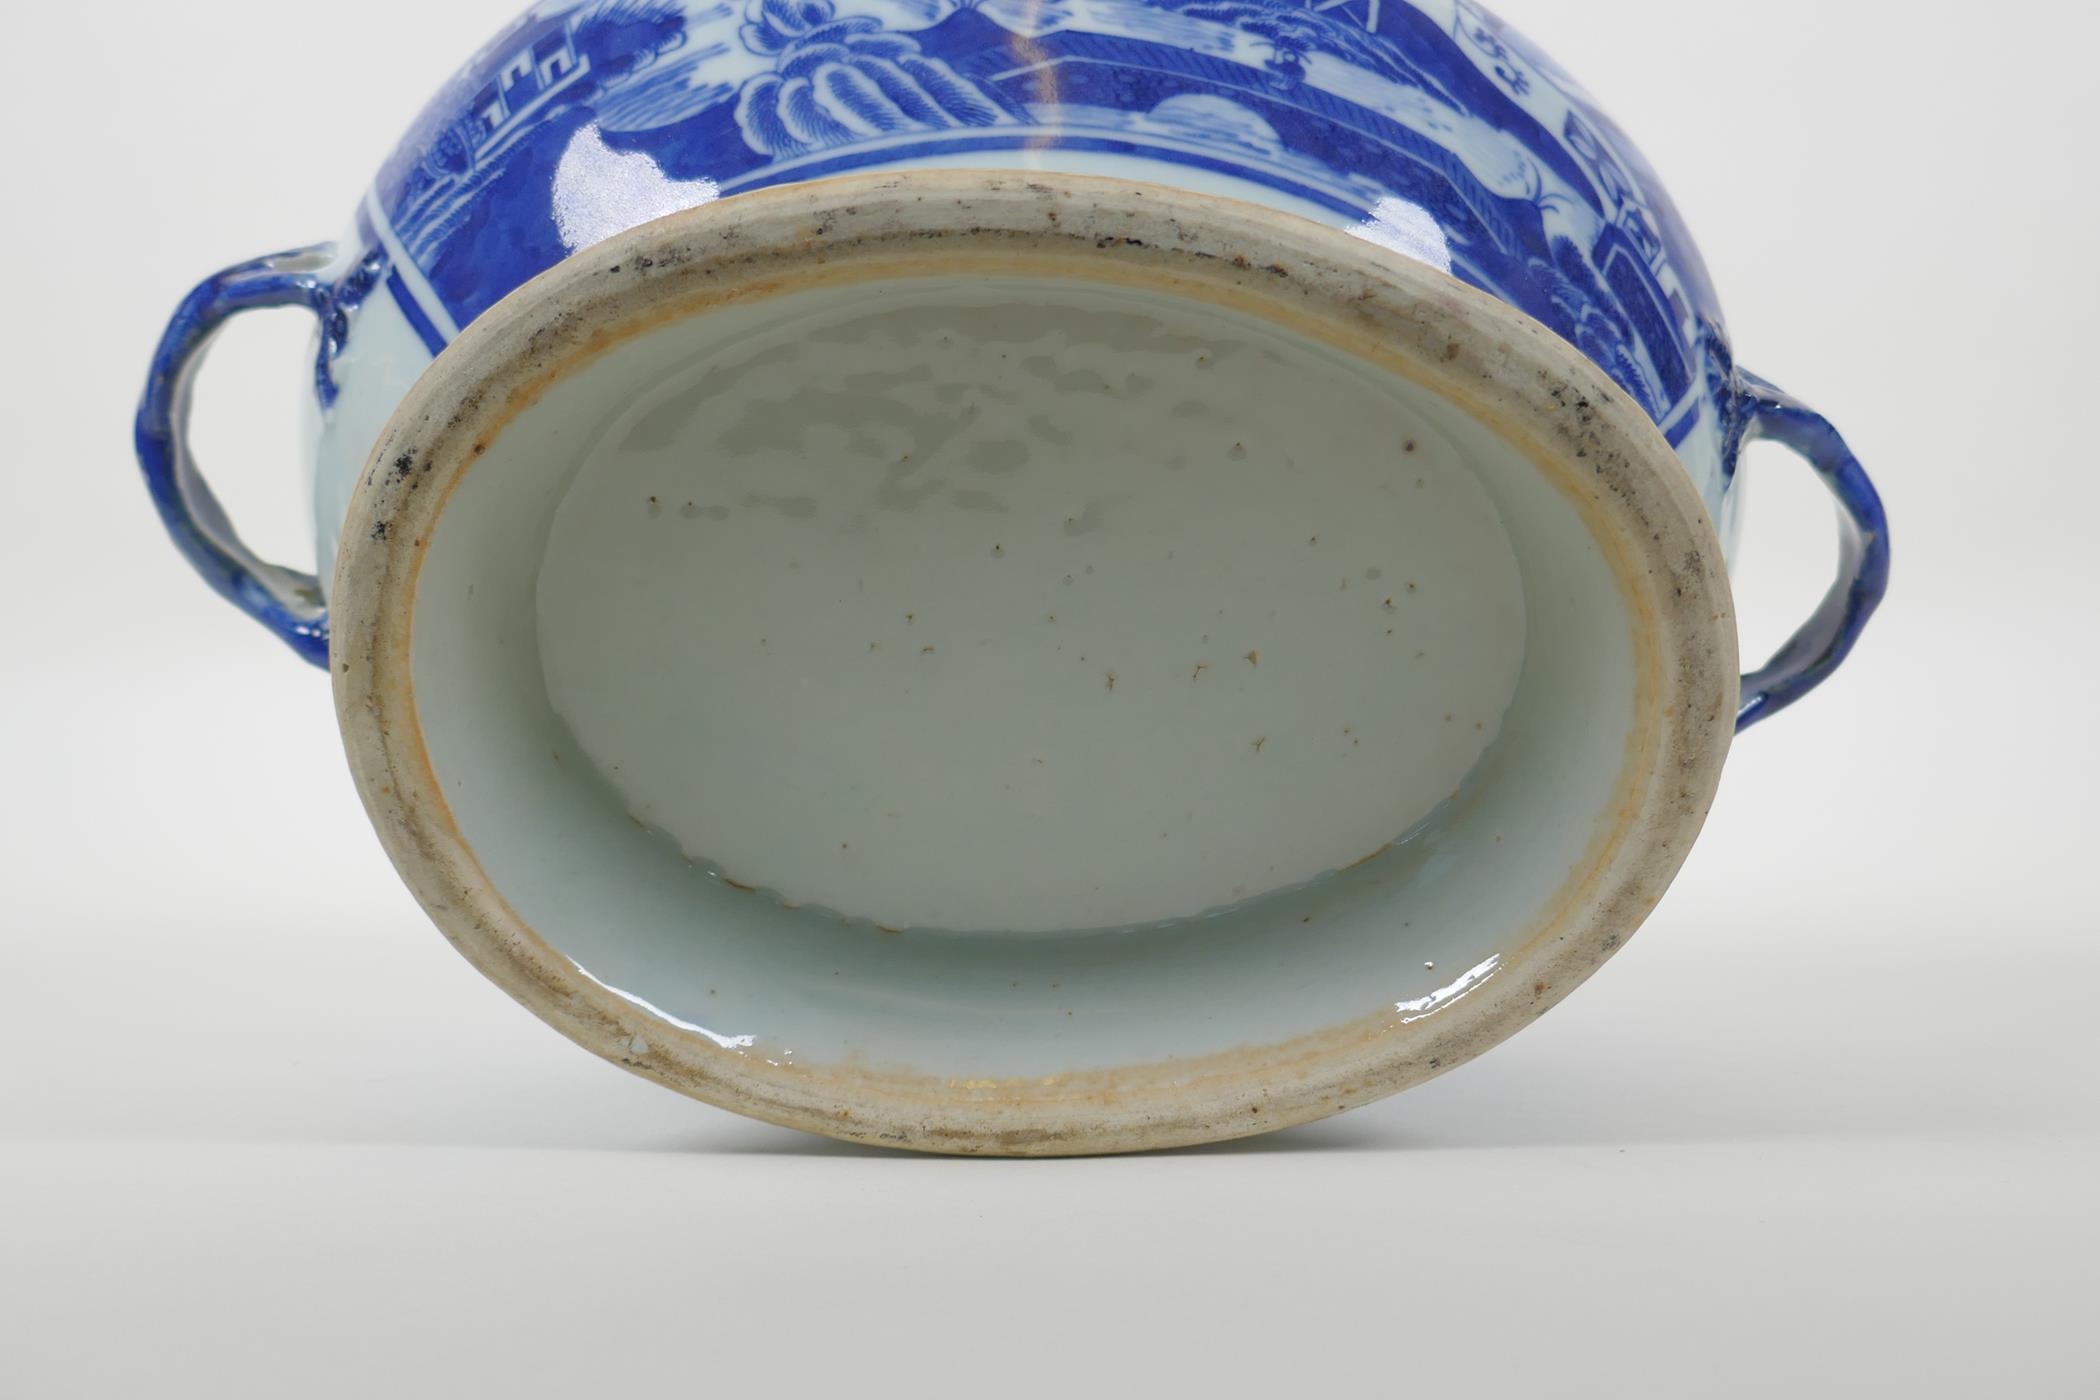 A C19th Chinese export blue and white porcelain two handled oval planter with decorative riverside - Image 5 of 5